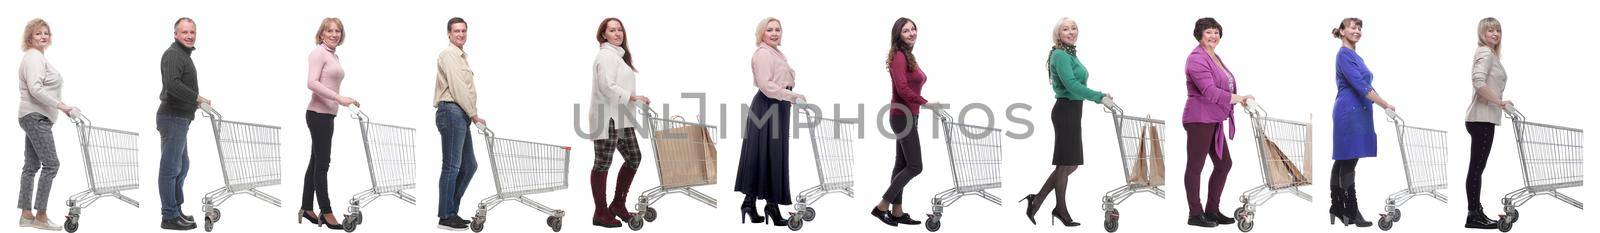 group of people with cart looking at camera isolated by asdf